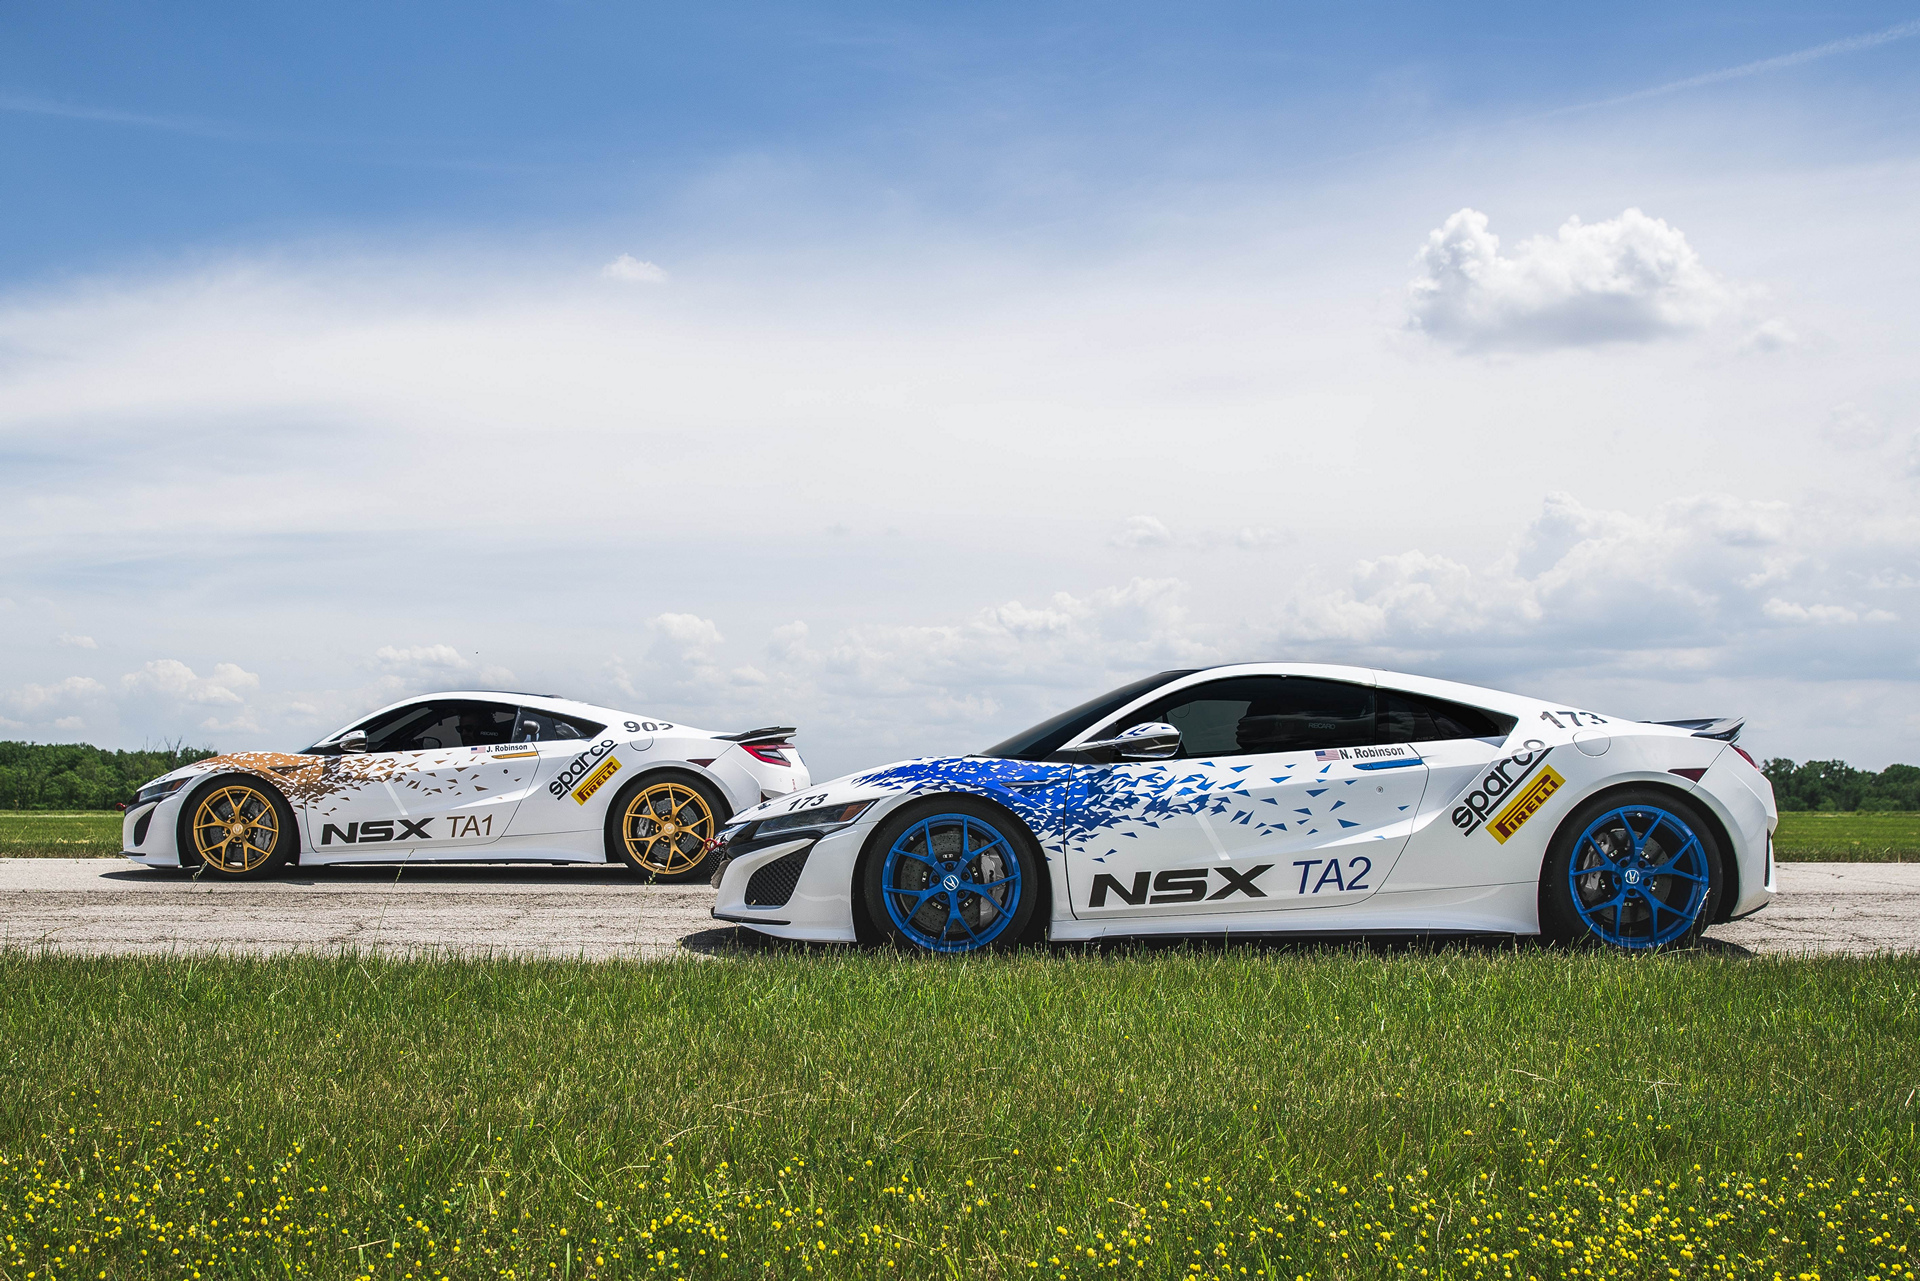 Acura NSX Time Attack 1 and 2 Vehicles © Honda Motor Co., Ltd.